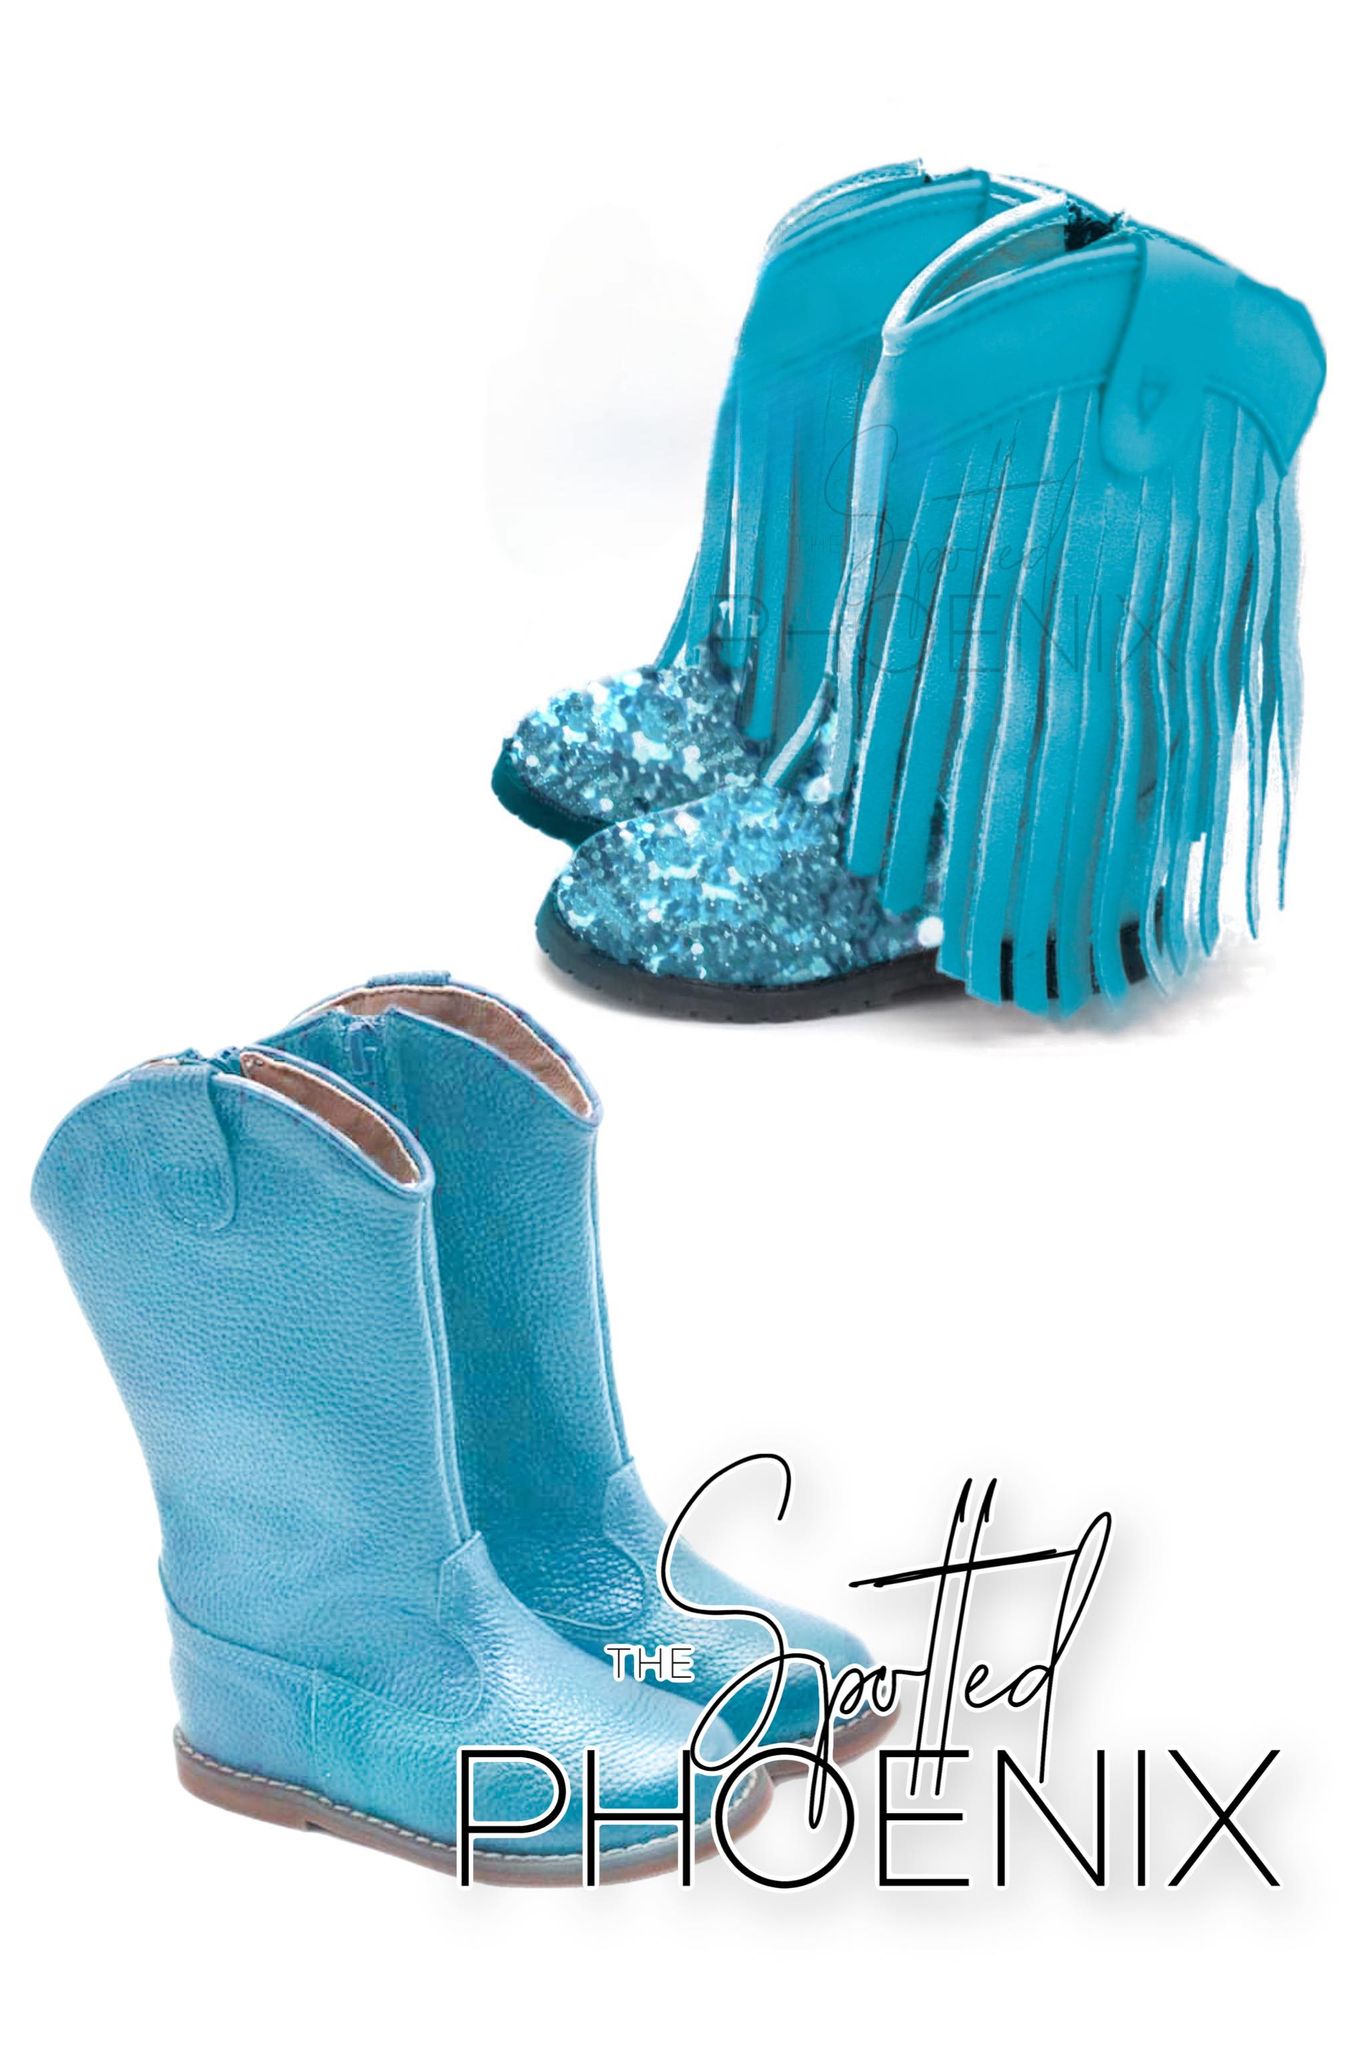 [Turquoise] Cowboy Boots